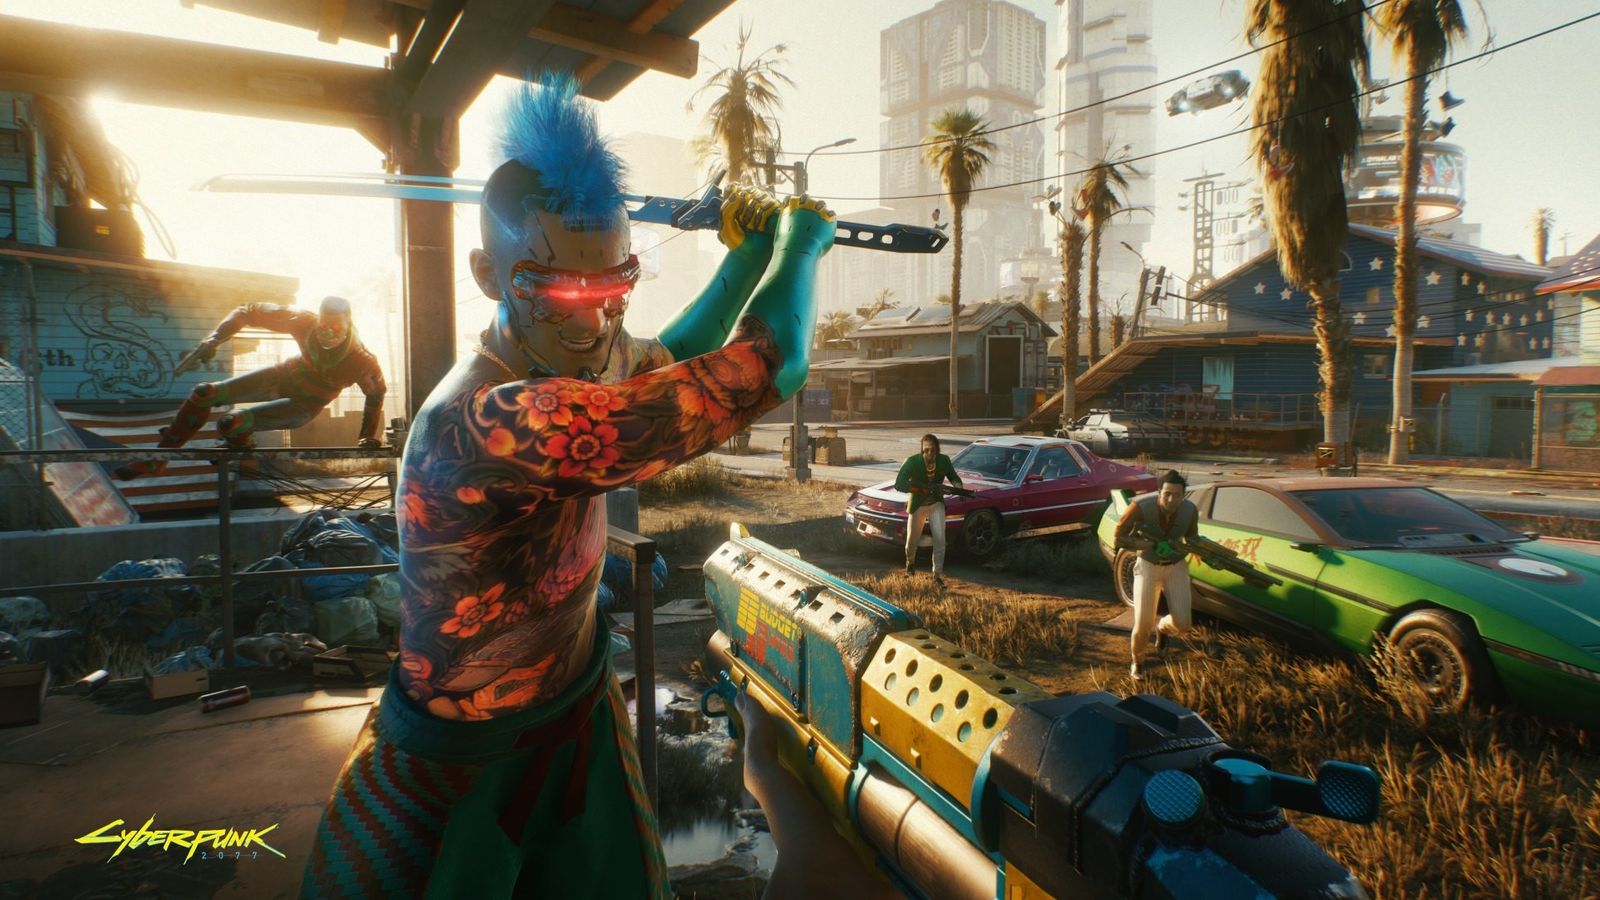 Cyberpunk 2077: CD Projekt Red’s game back on PlayStation Store after it was pulled last year